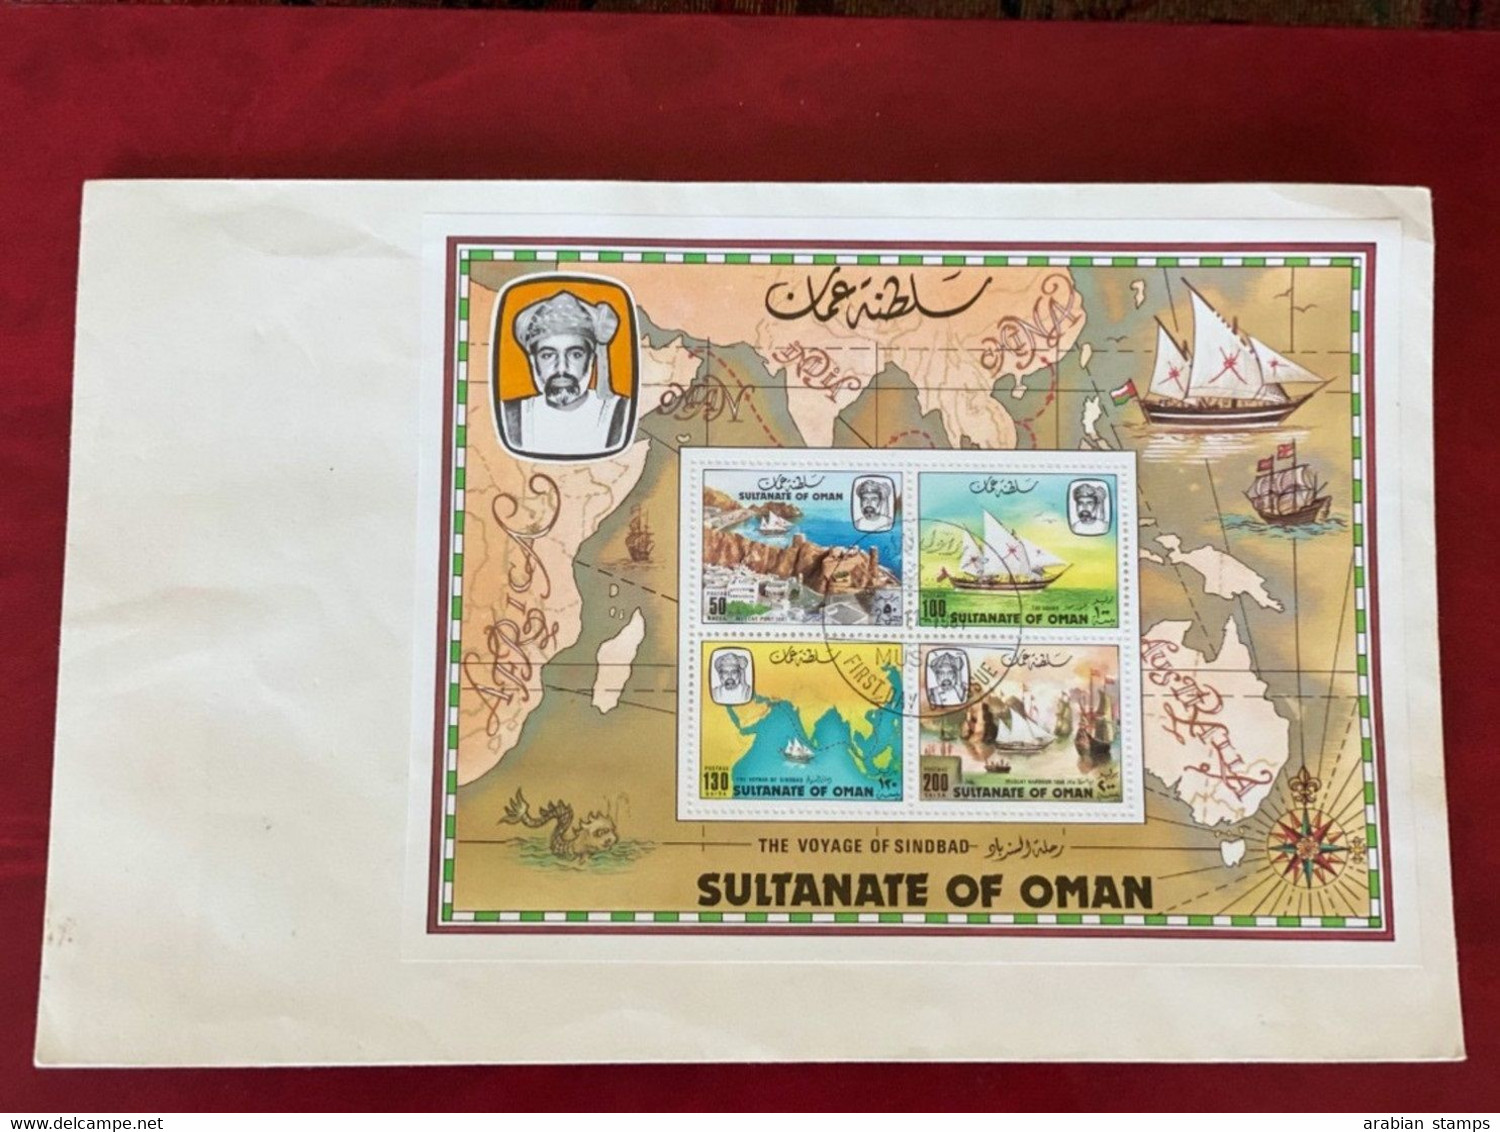 SULTANATE OF OMAN 1981 THE VOYAGE OF SINBAD MAP SHIP FLAG SULTAN QABOOS FDC FIRST DAY COVER - Oman